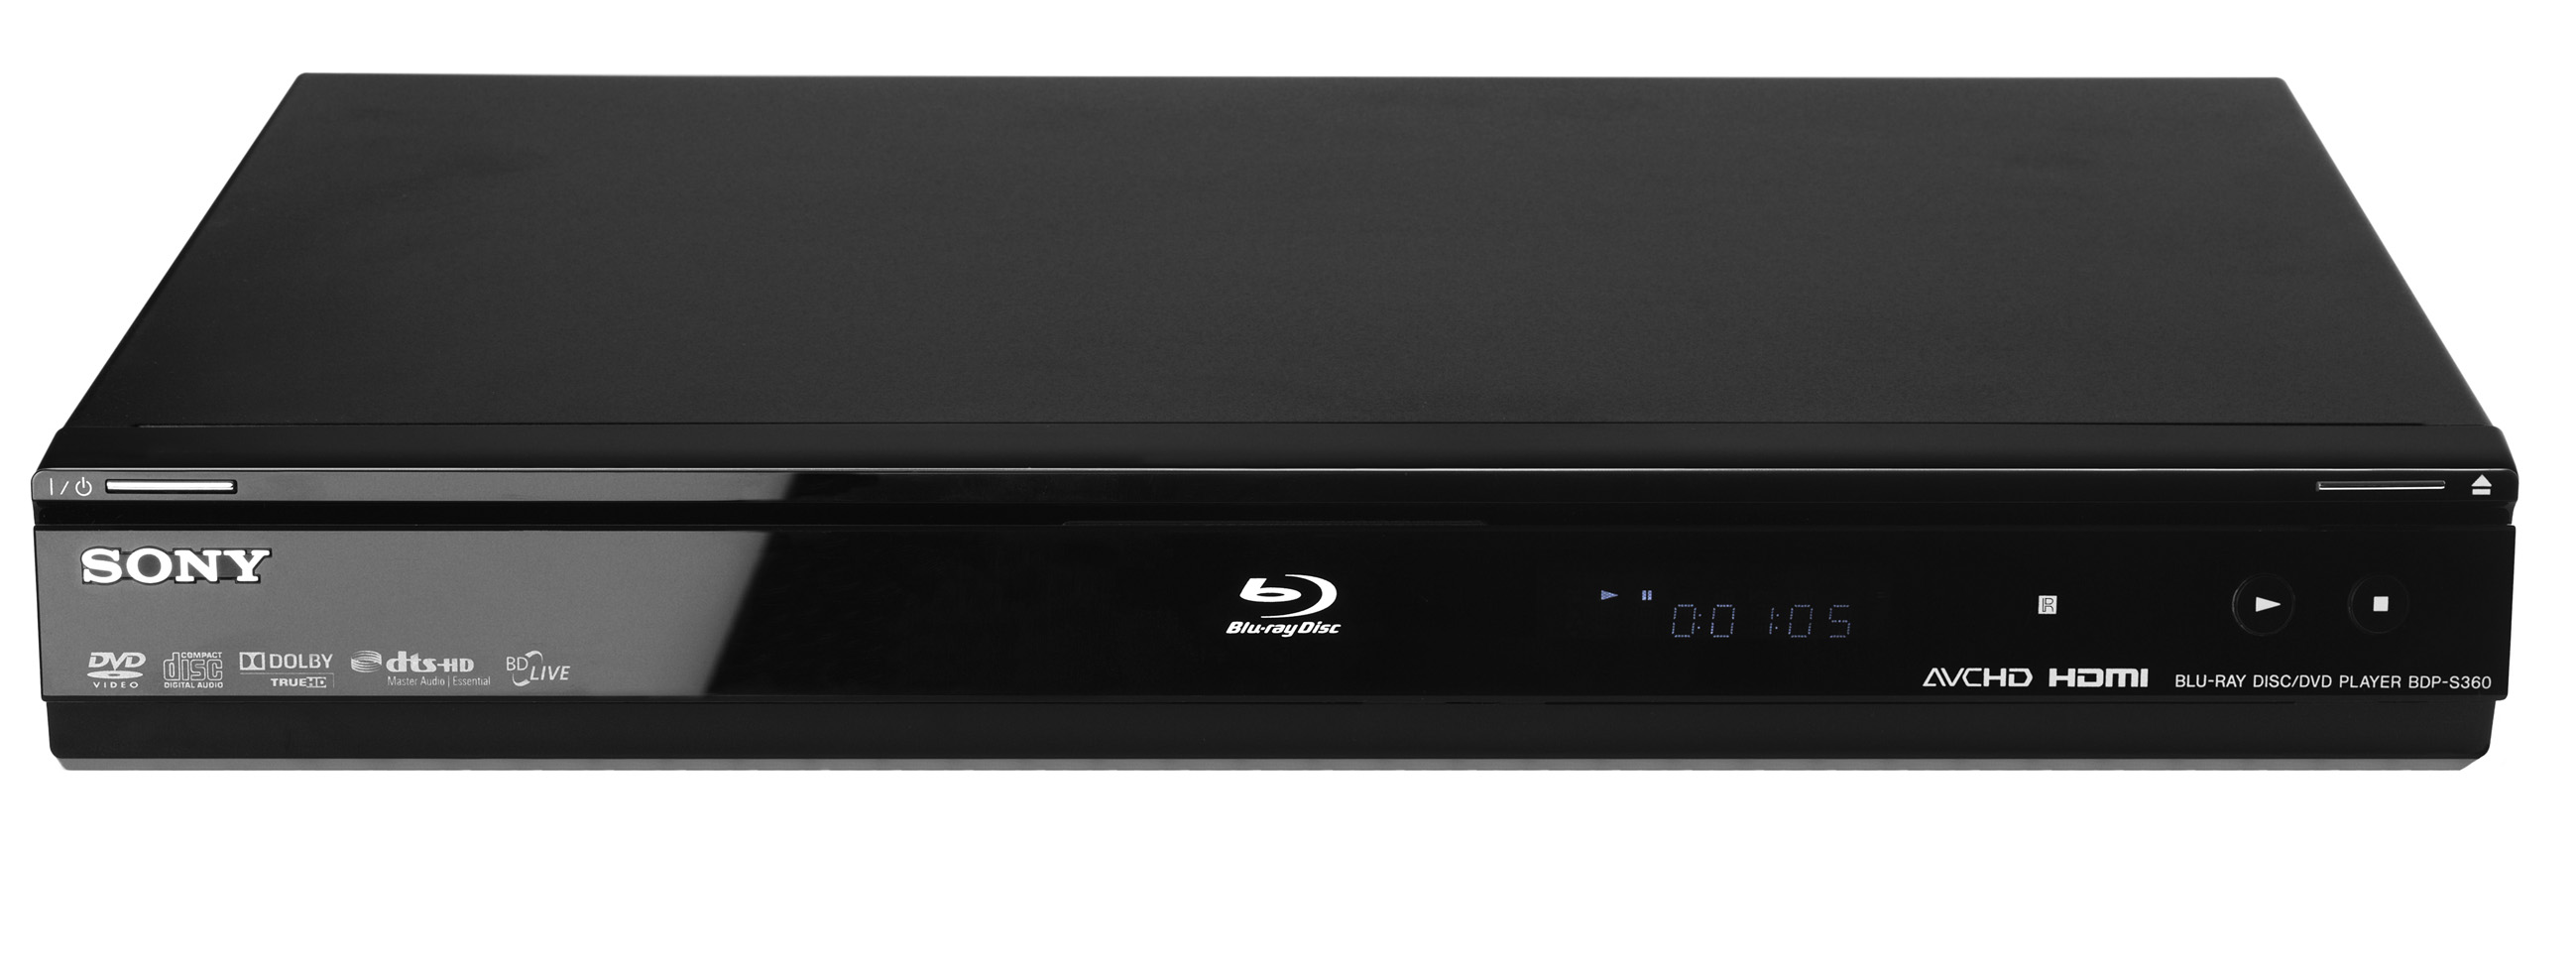 Sony unveils new Bluray player BDPS360